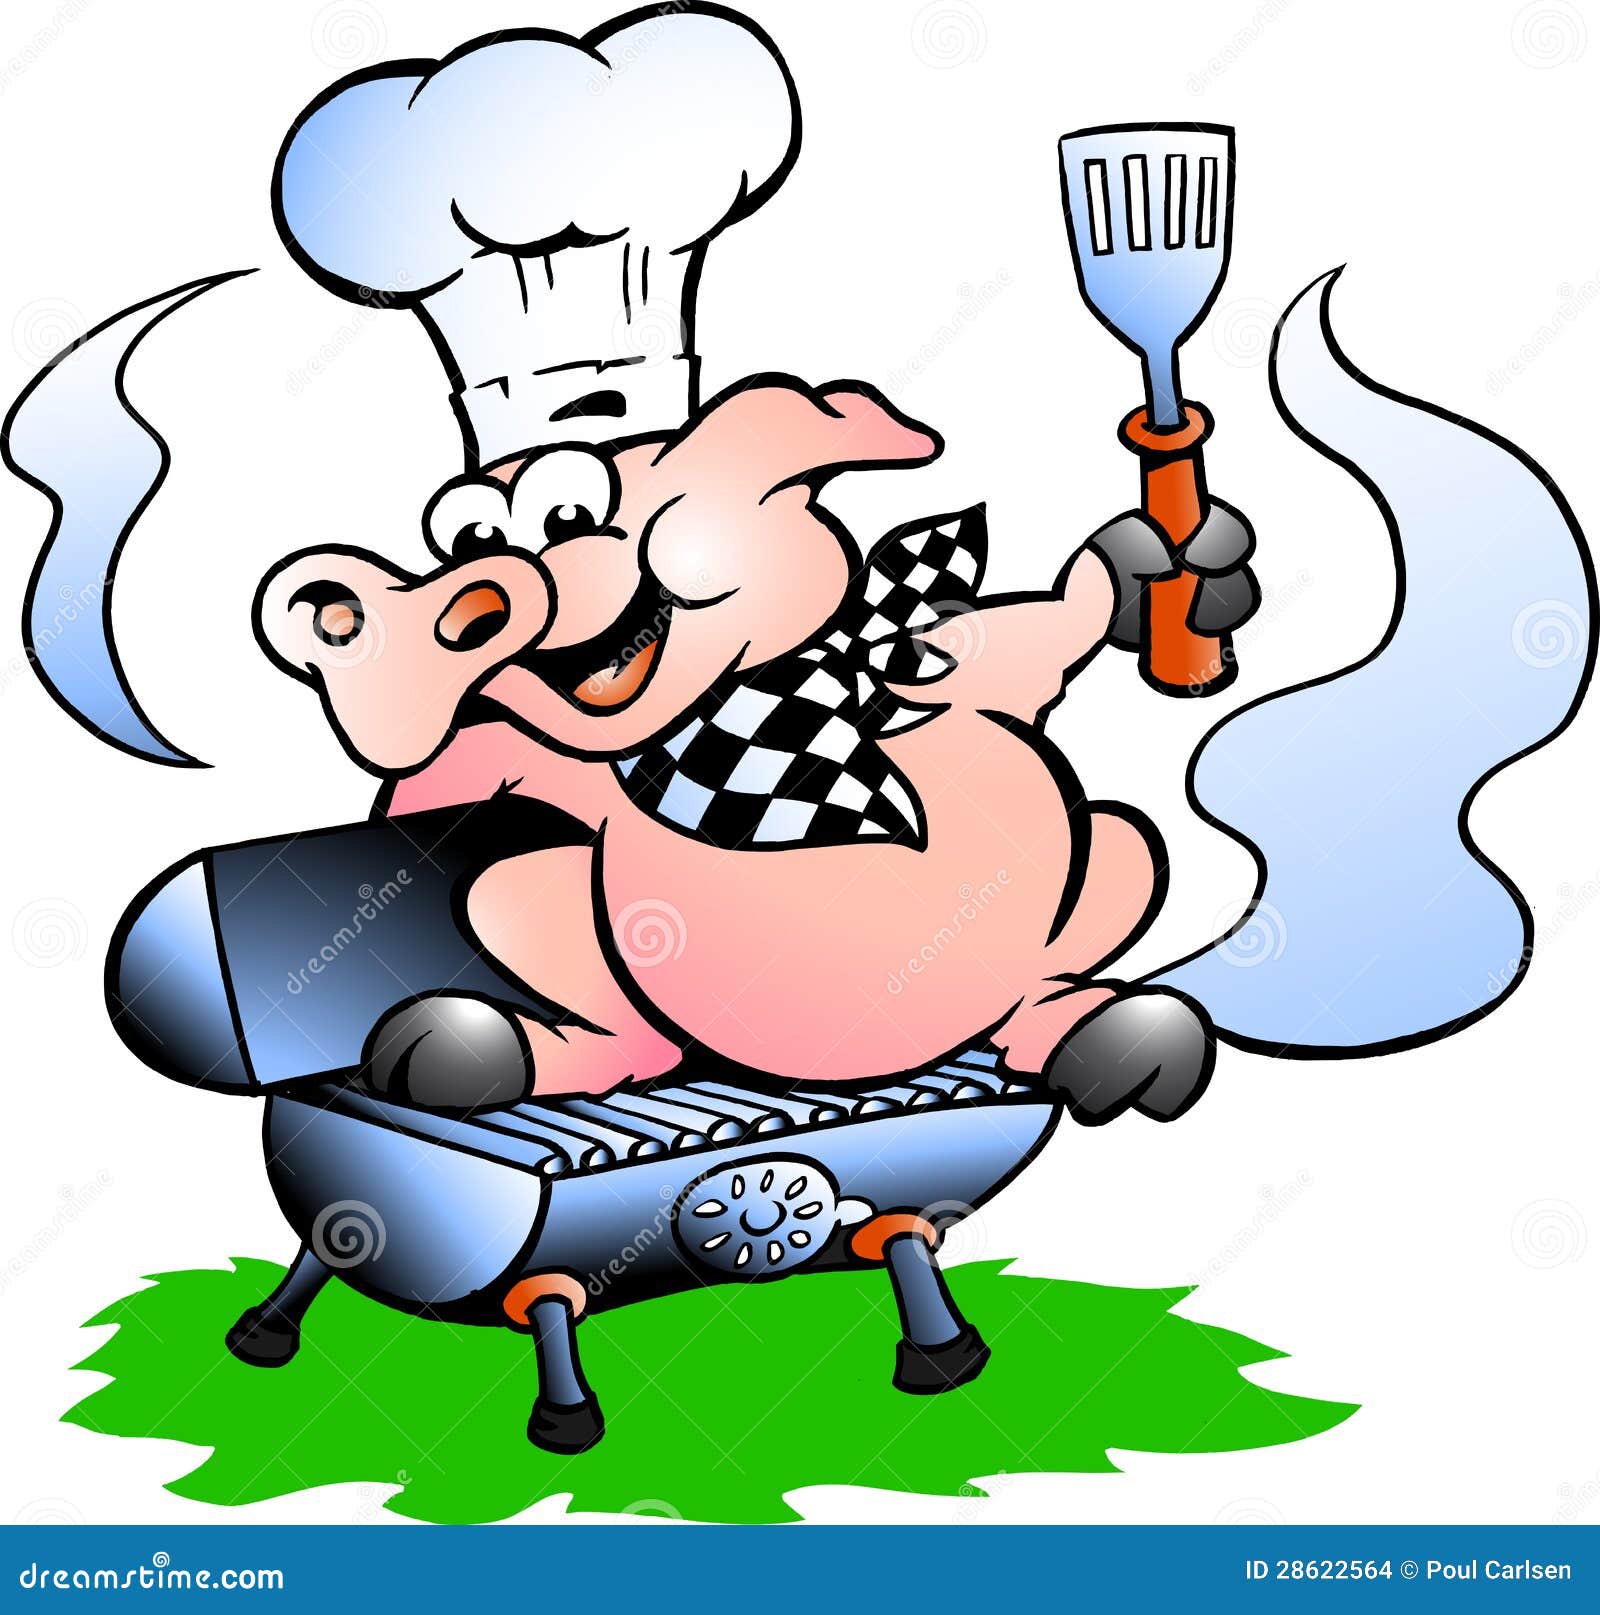 pig chef clipart - photo #12